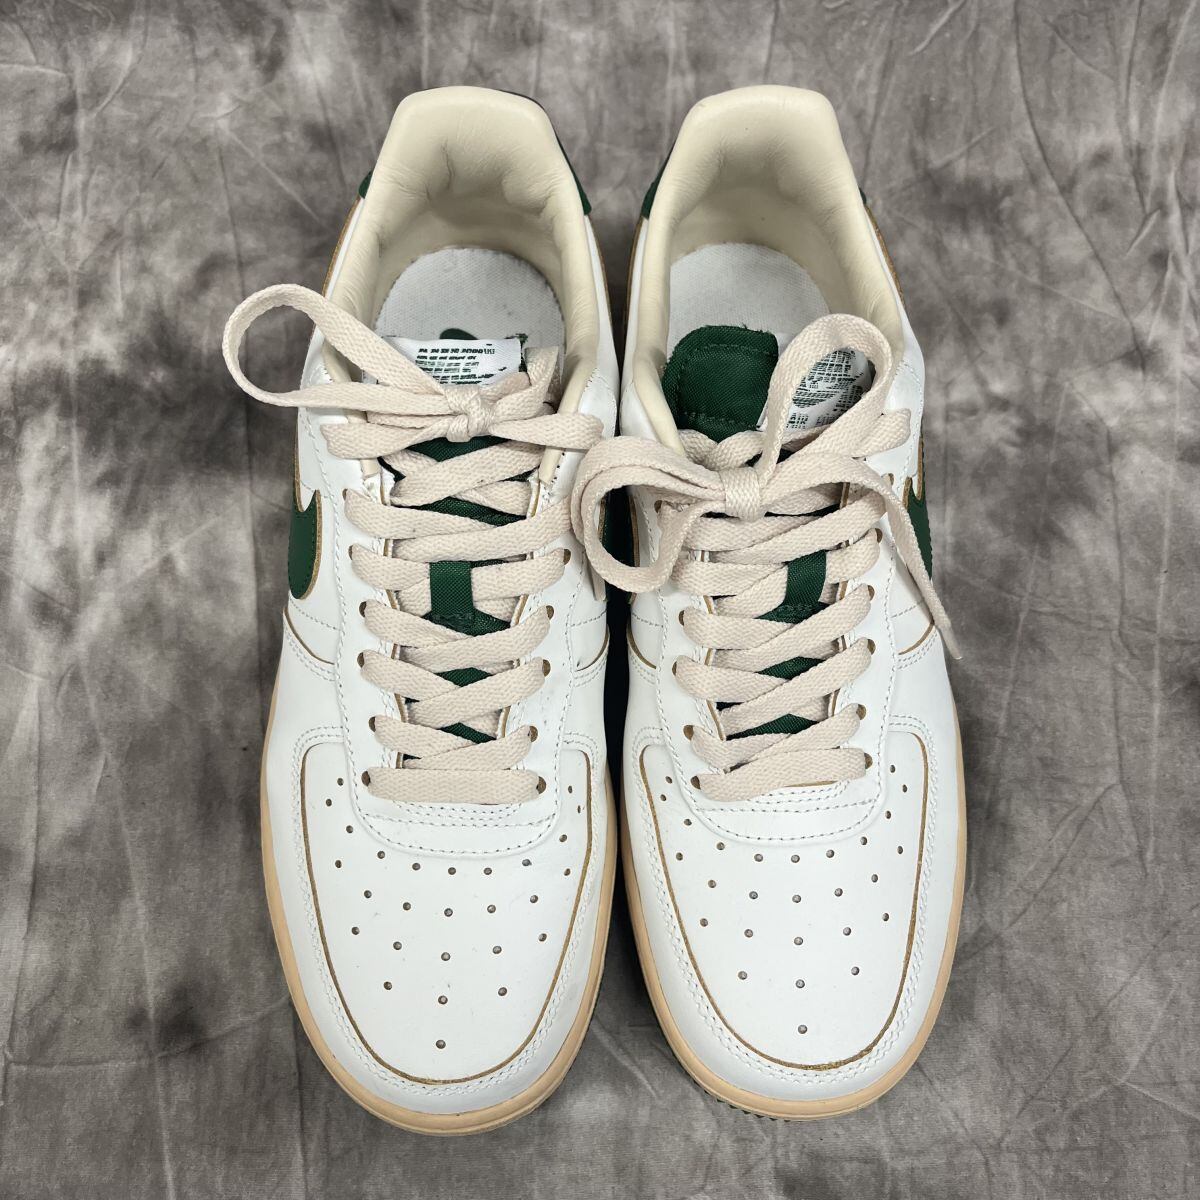 NIKE/ナイキ WMNS AIR FORCE 1 LOW '07 LV8 Green and Muslin/エアフォース1 ロー  グリーンアンドモスリン DZ4764-133/25.0